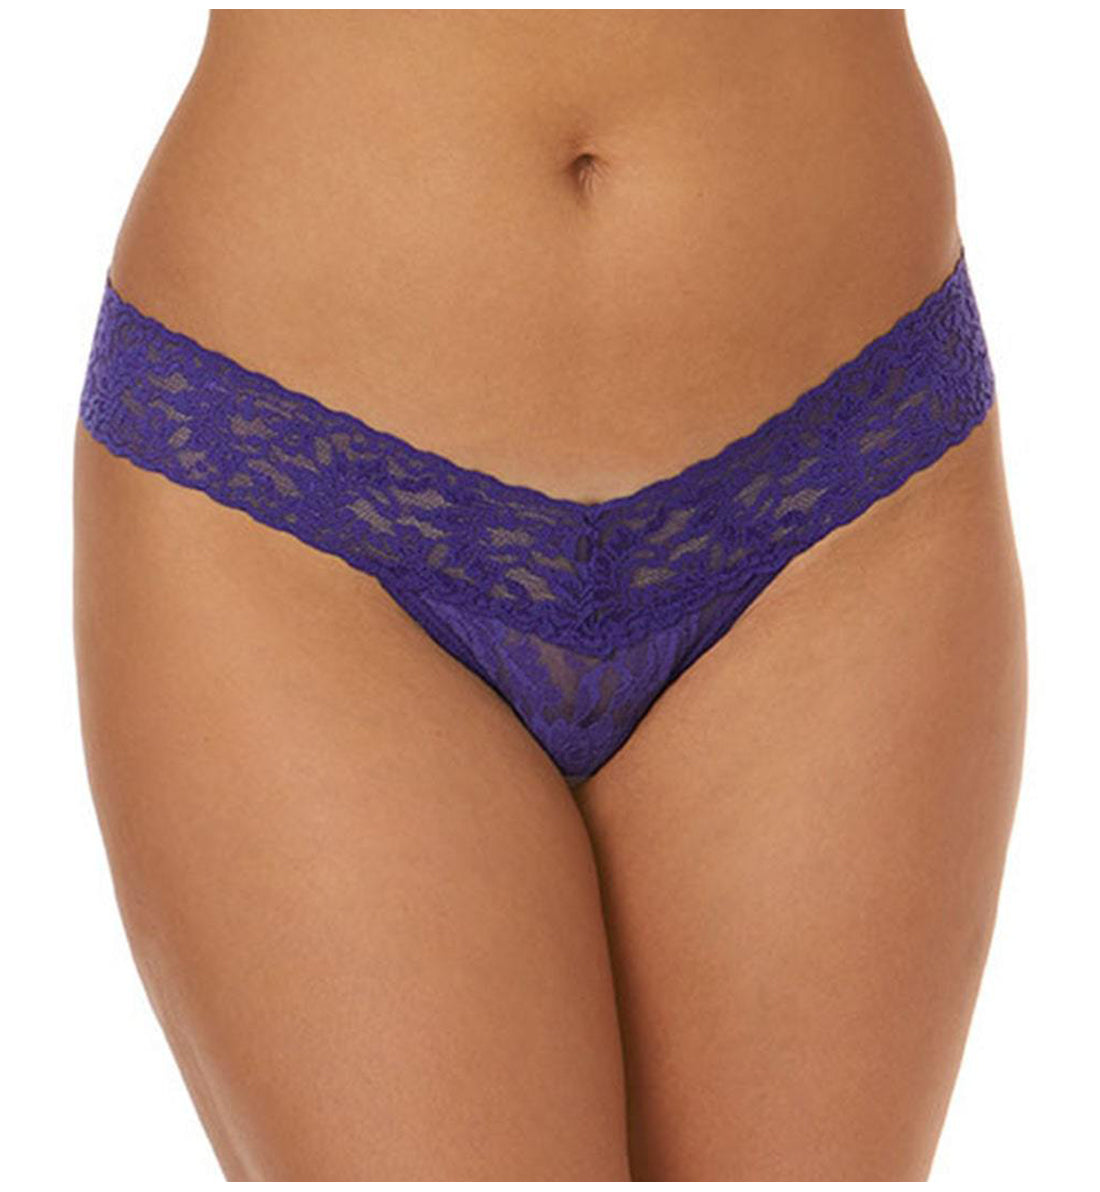 Hanky Panky Signature Lace Low Rise Thong (4911P),Wild Violet - Wild Violet,One Size